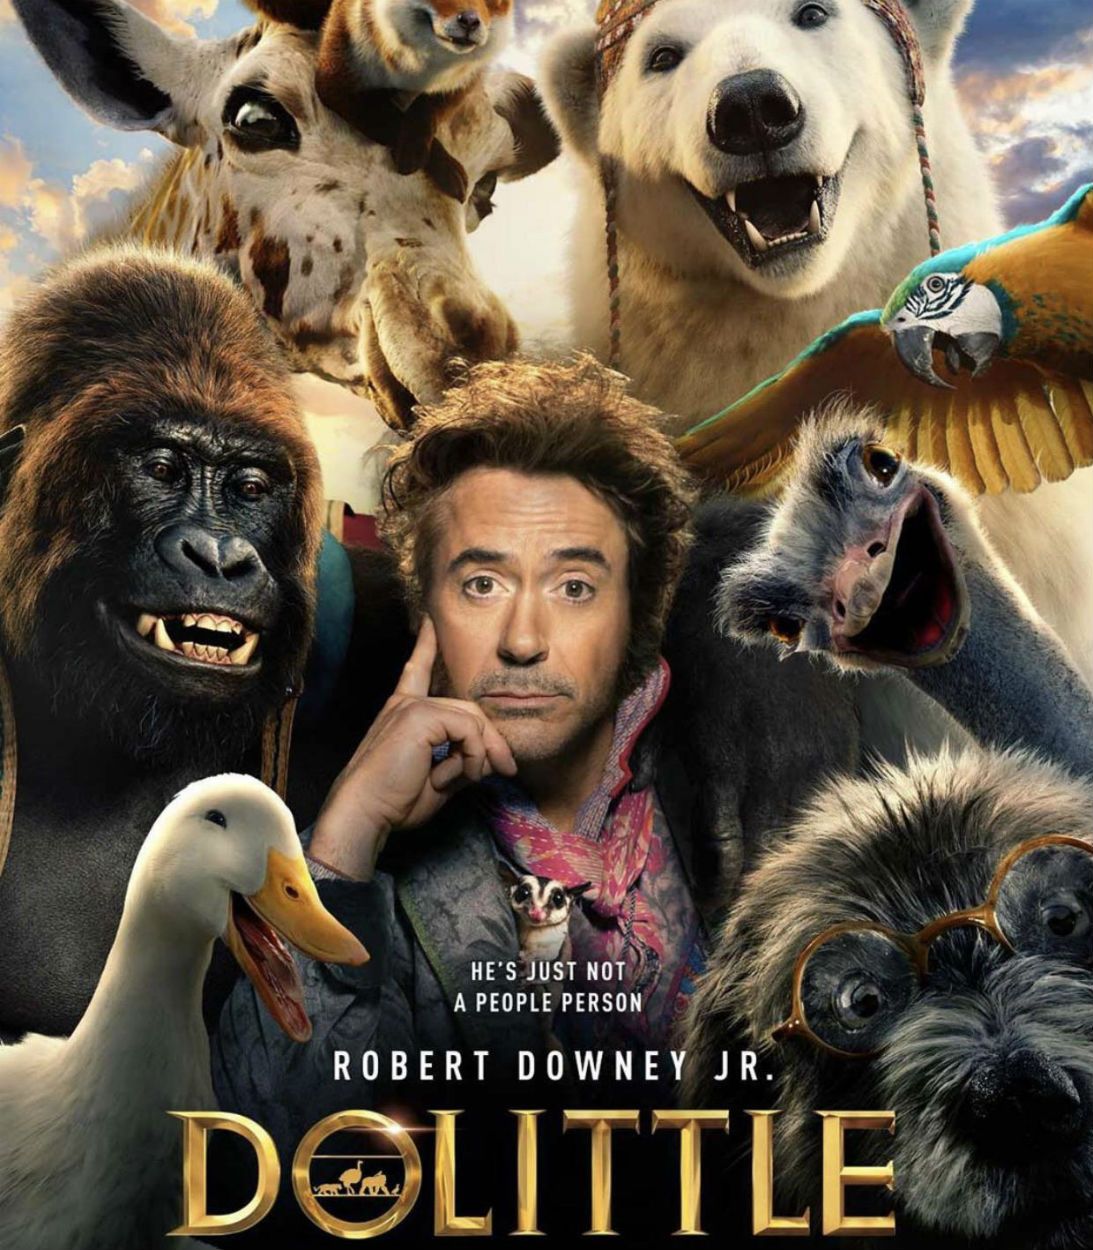 Dolittle Trailer: Robert Downey Jr. Can Talk to the Animals